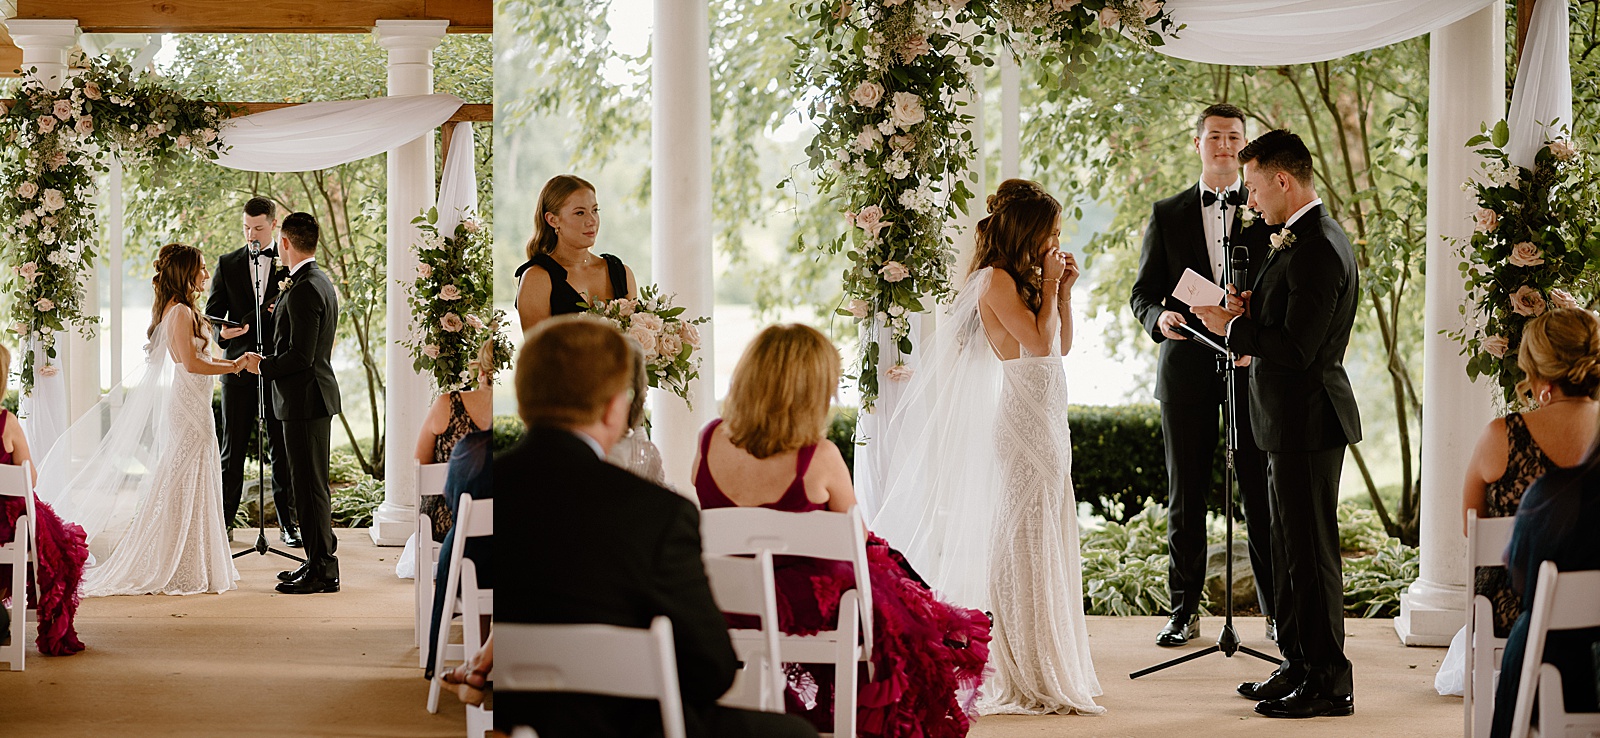 Bride wiping away a tear during her wedding ceremony under a floral arch. 